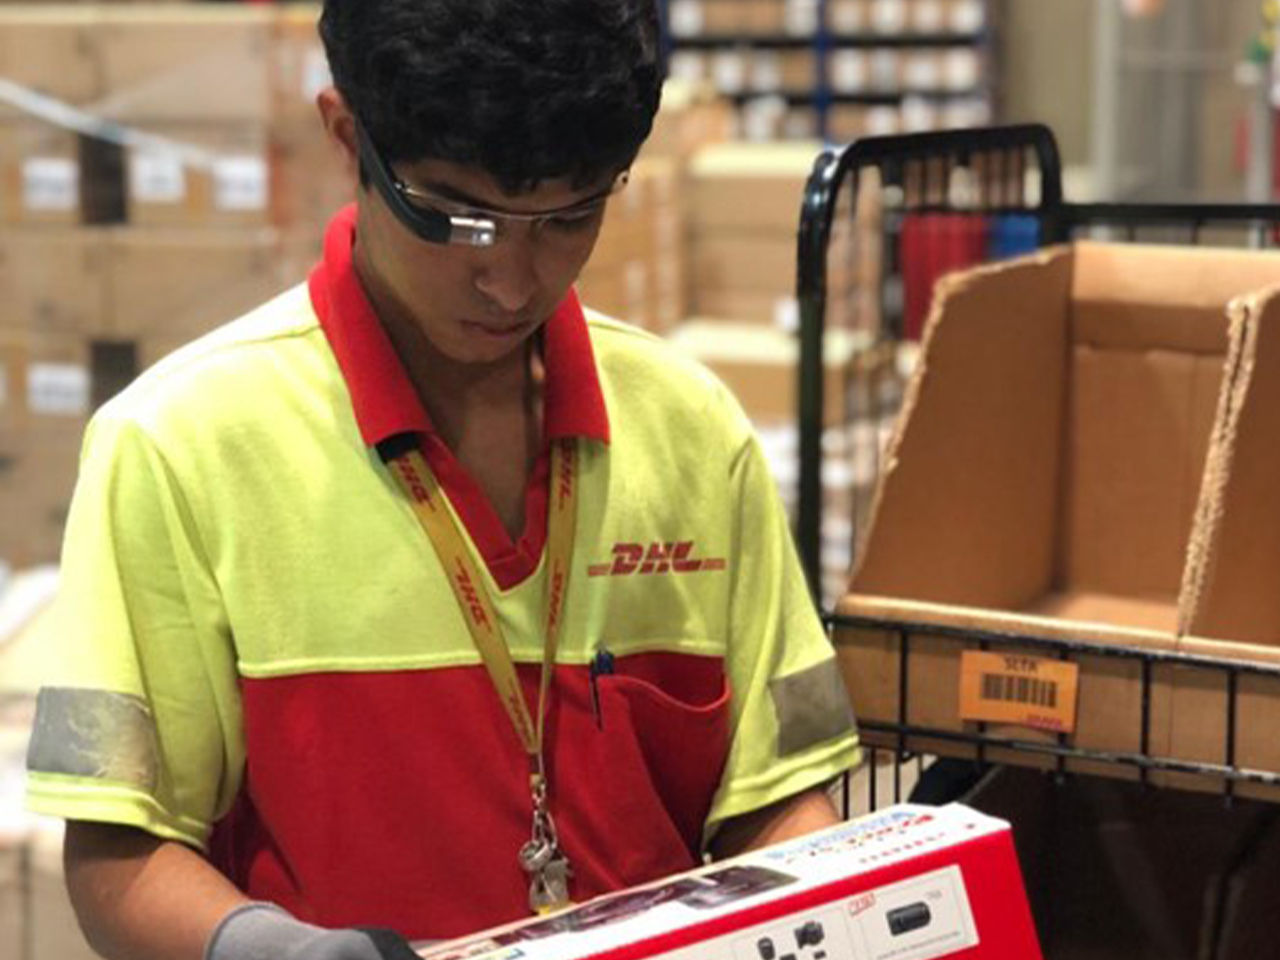 DHL employee with smartglasses in warehouse